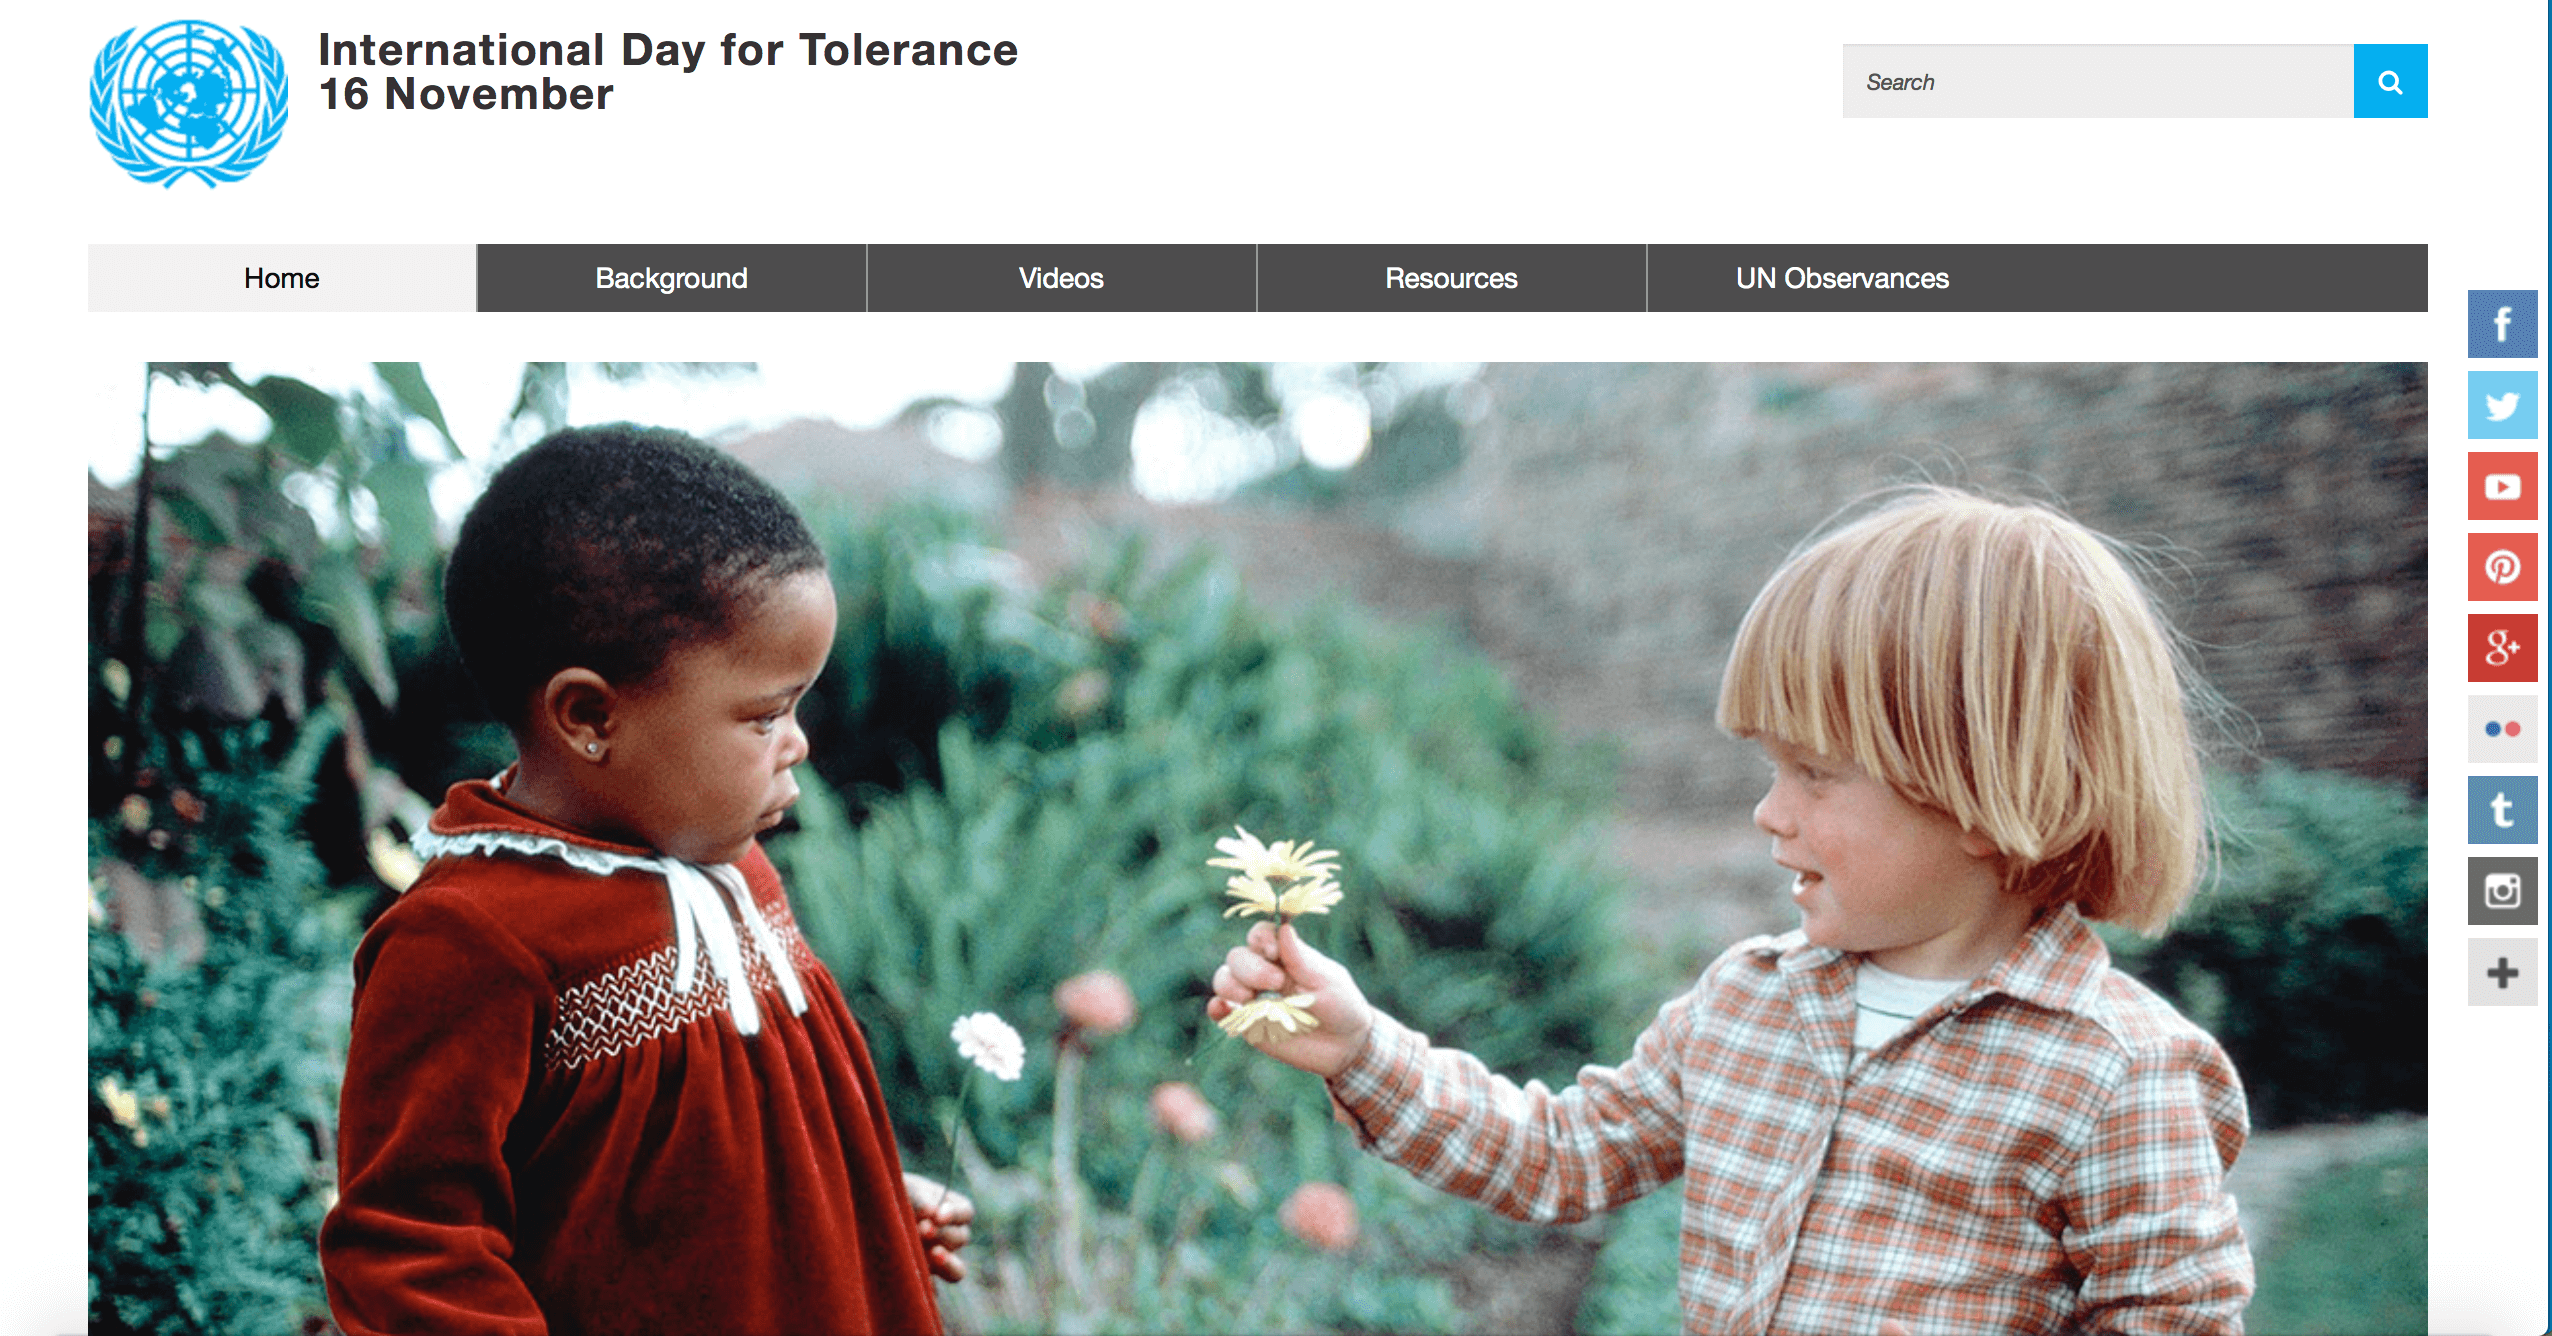 International Day for Tolerance 16 November at the UN